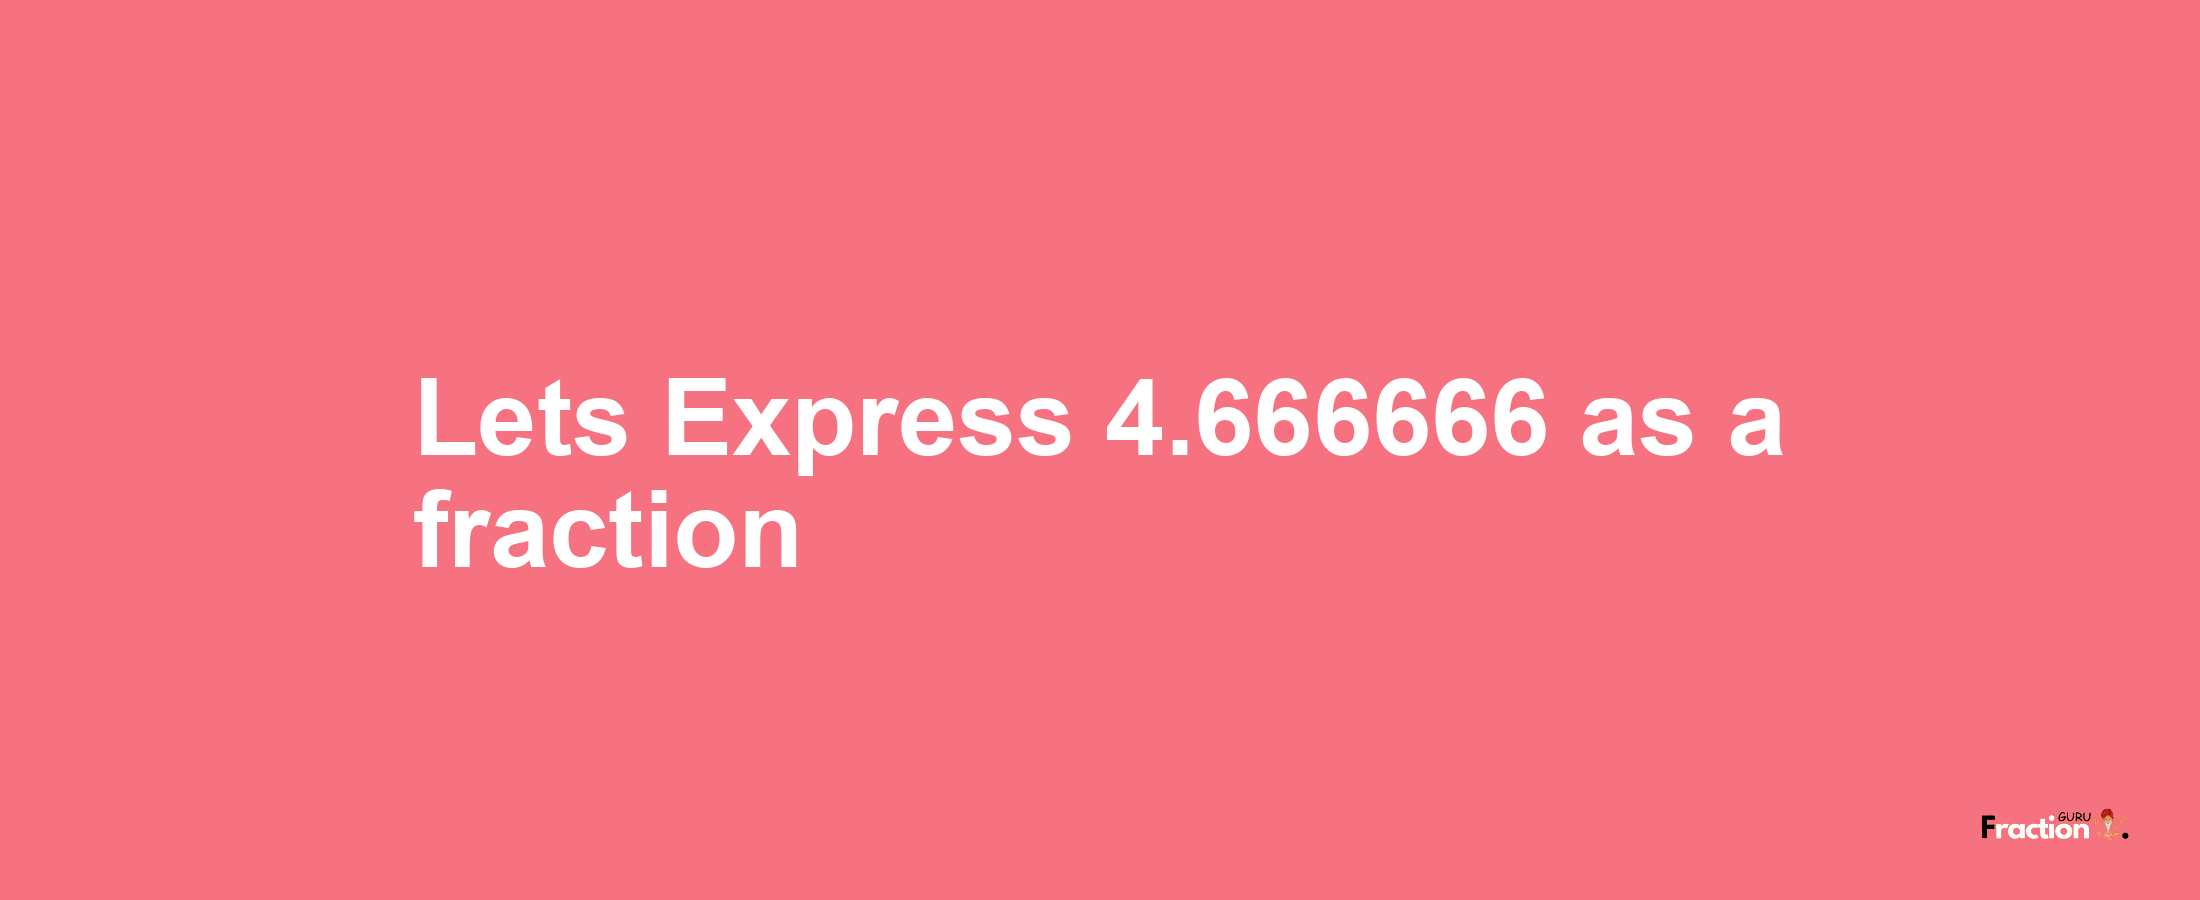 Lets Express 4.666666 as afraction